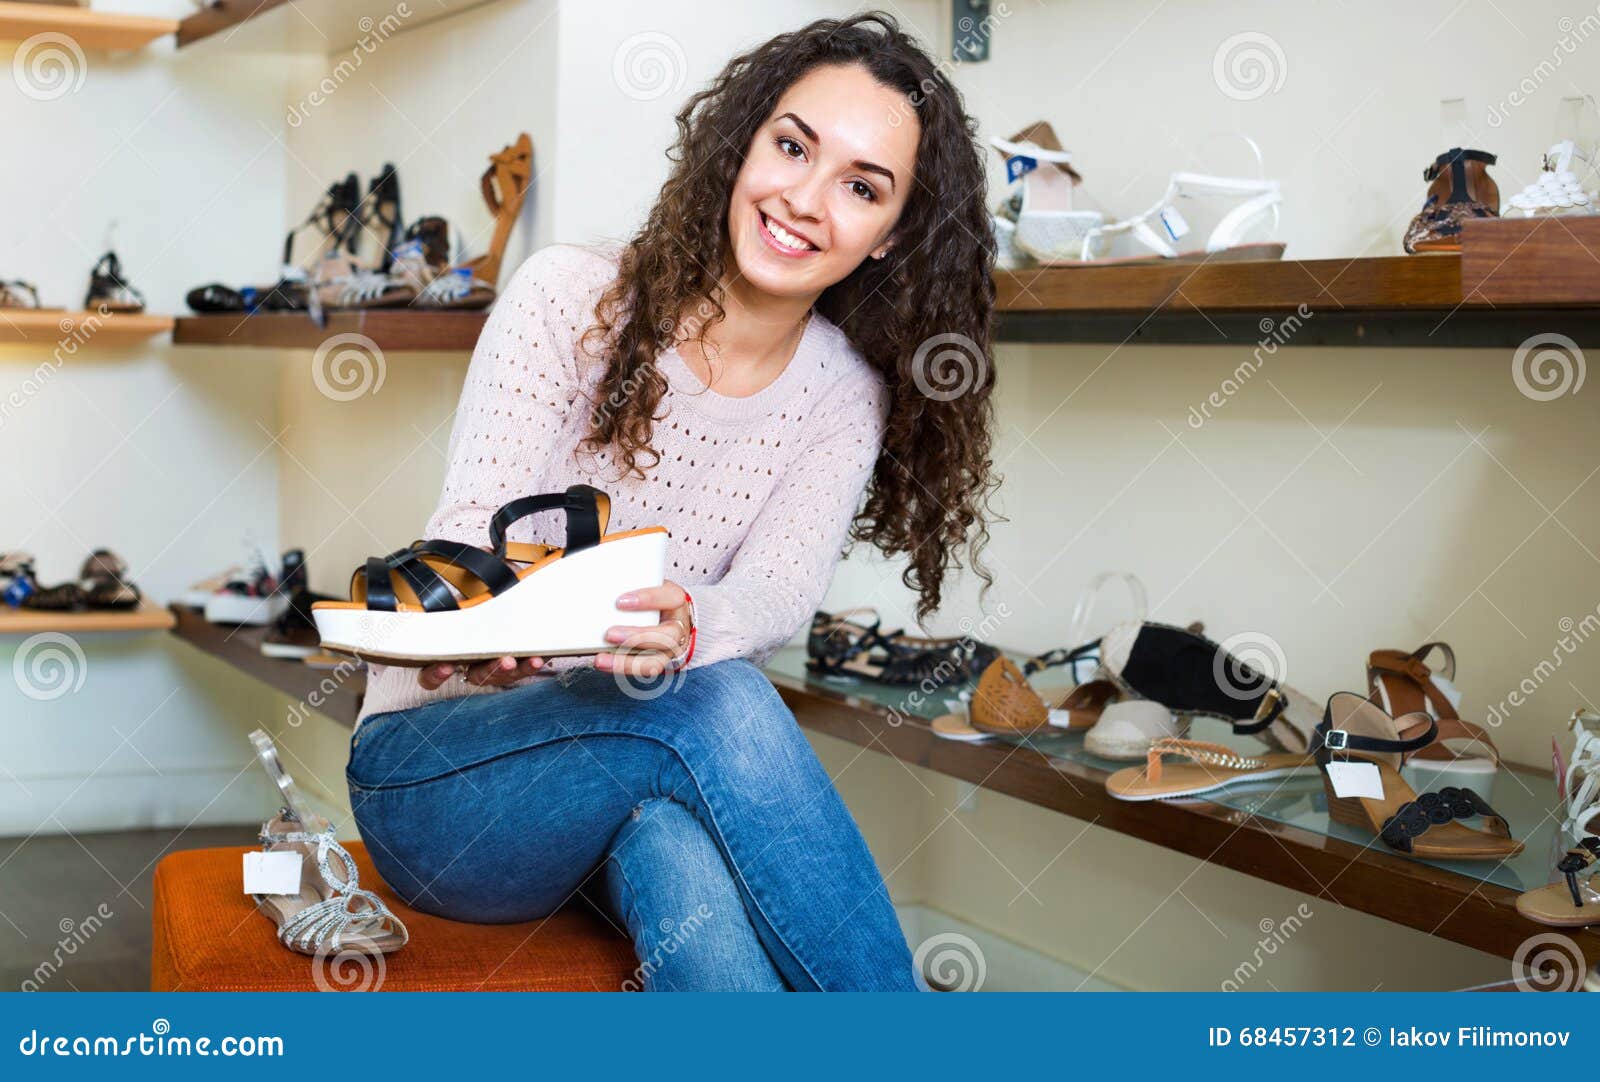 Young Woman Shopping at Fashion Shoe Store Stock Photo - Image of high ...